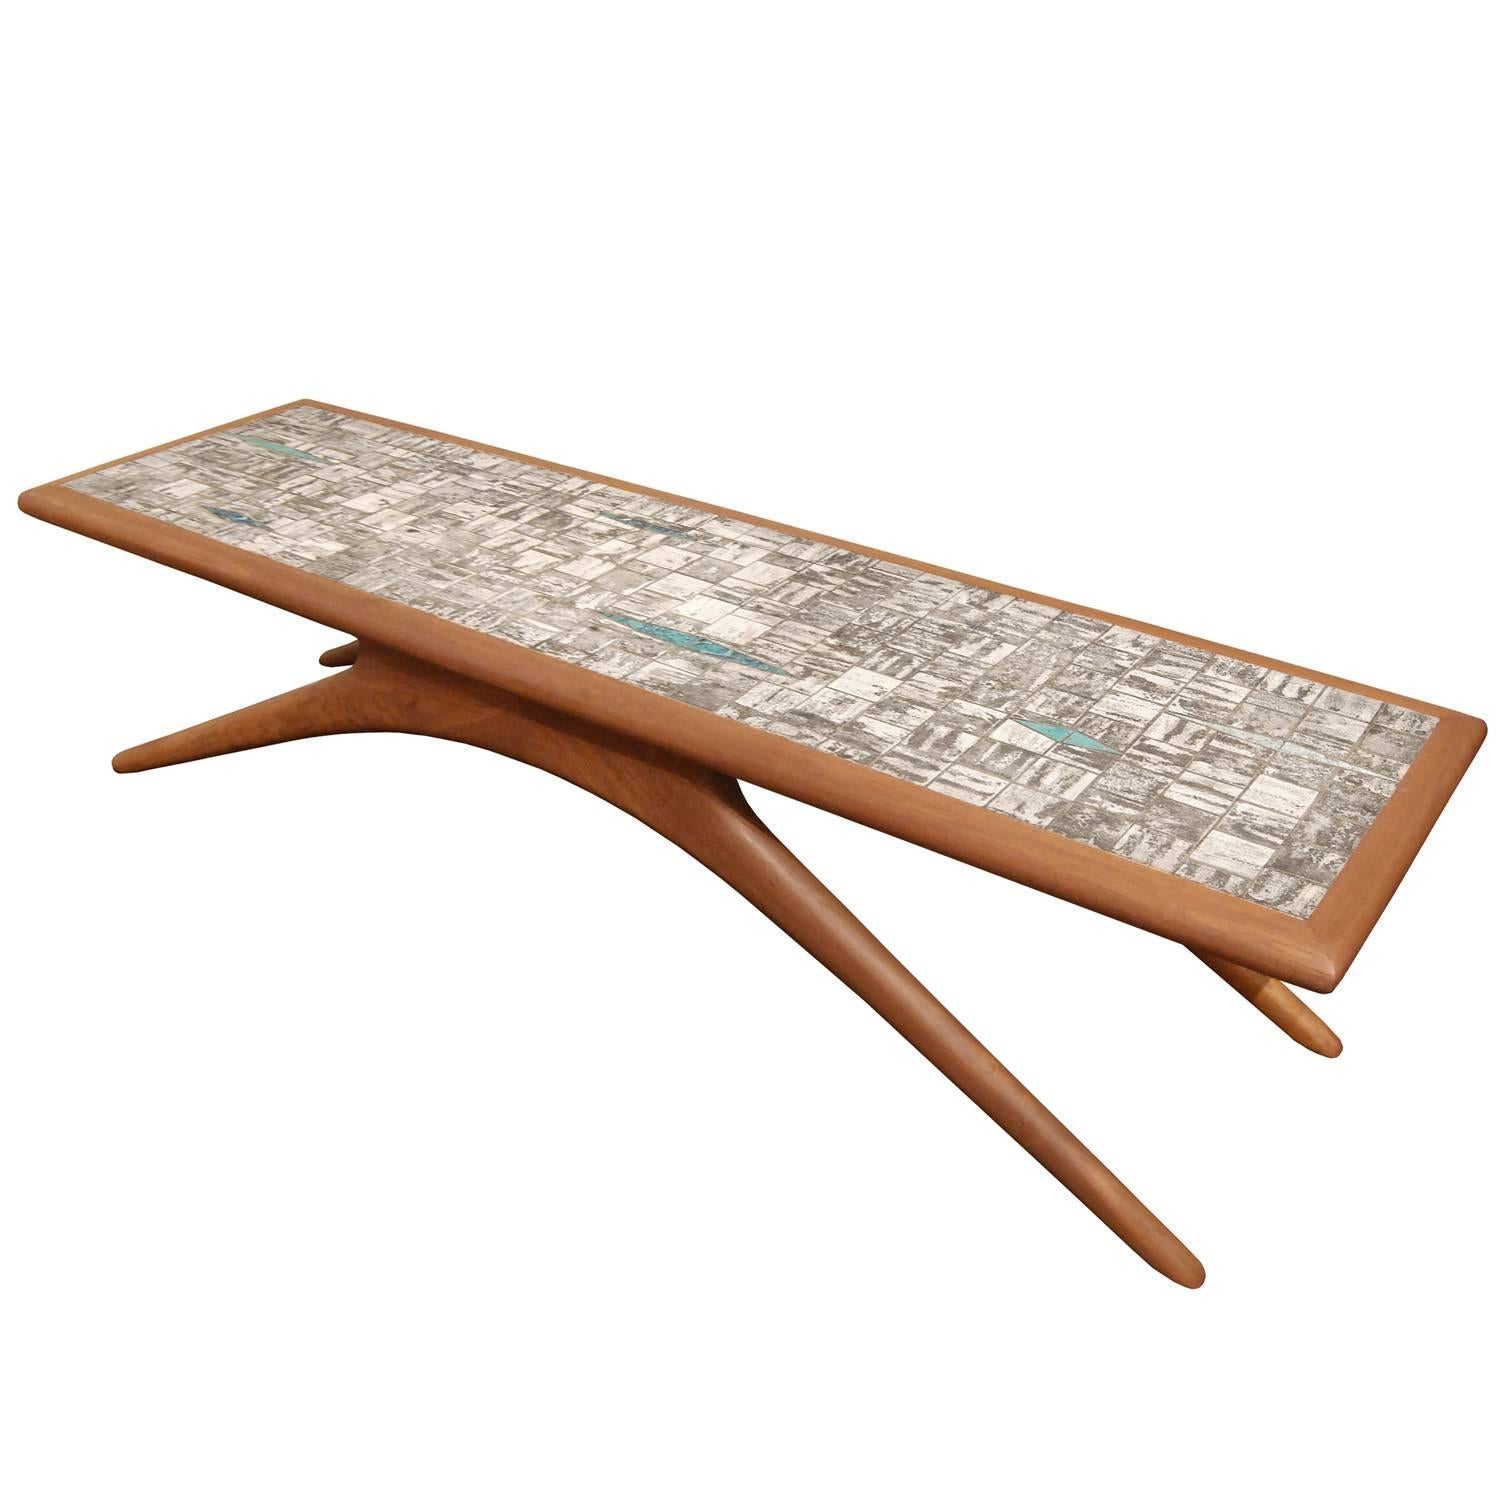 Sculptural coffee table in walnut with inset handmade ceramic tiles and splayed legs in the manner of Vladamir Kagan, American, 1950s.
 